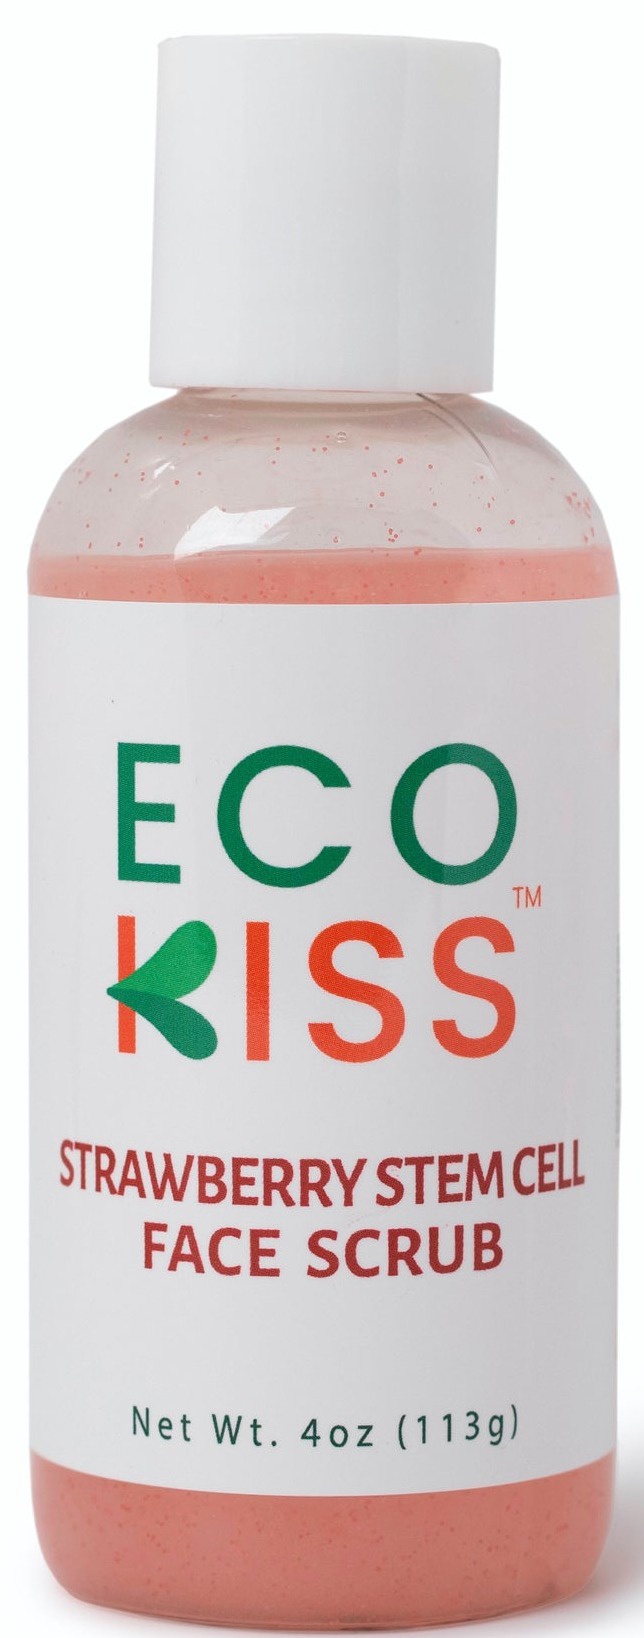 EcoKiss Strawberry Stem Cell Face Scrub